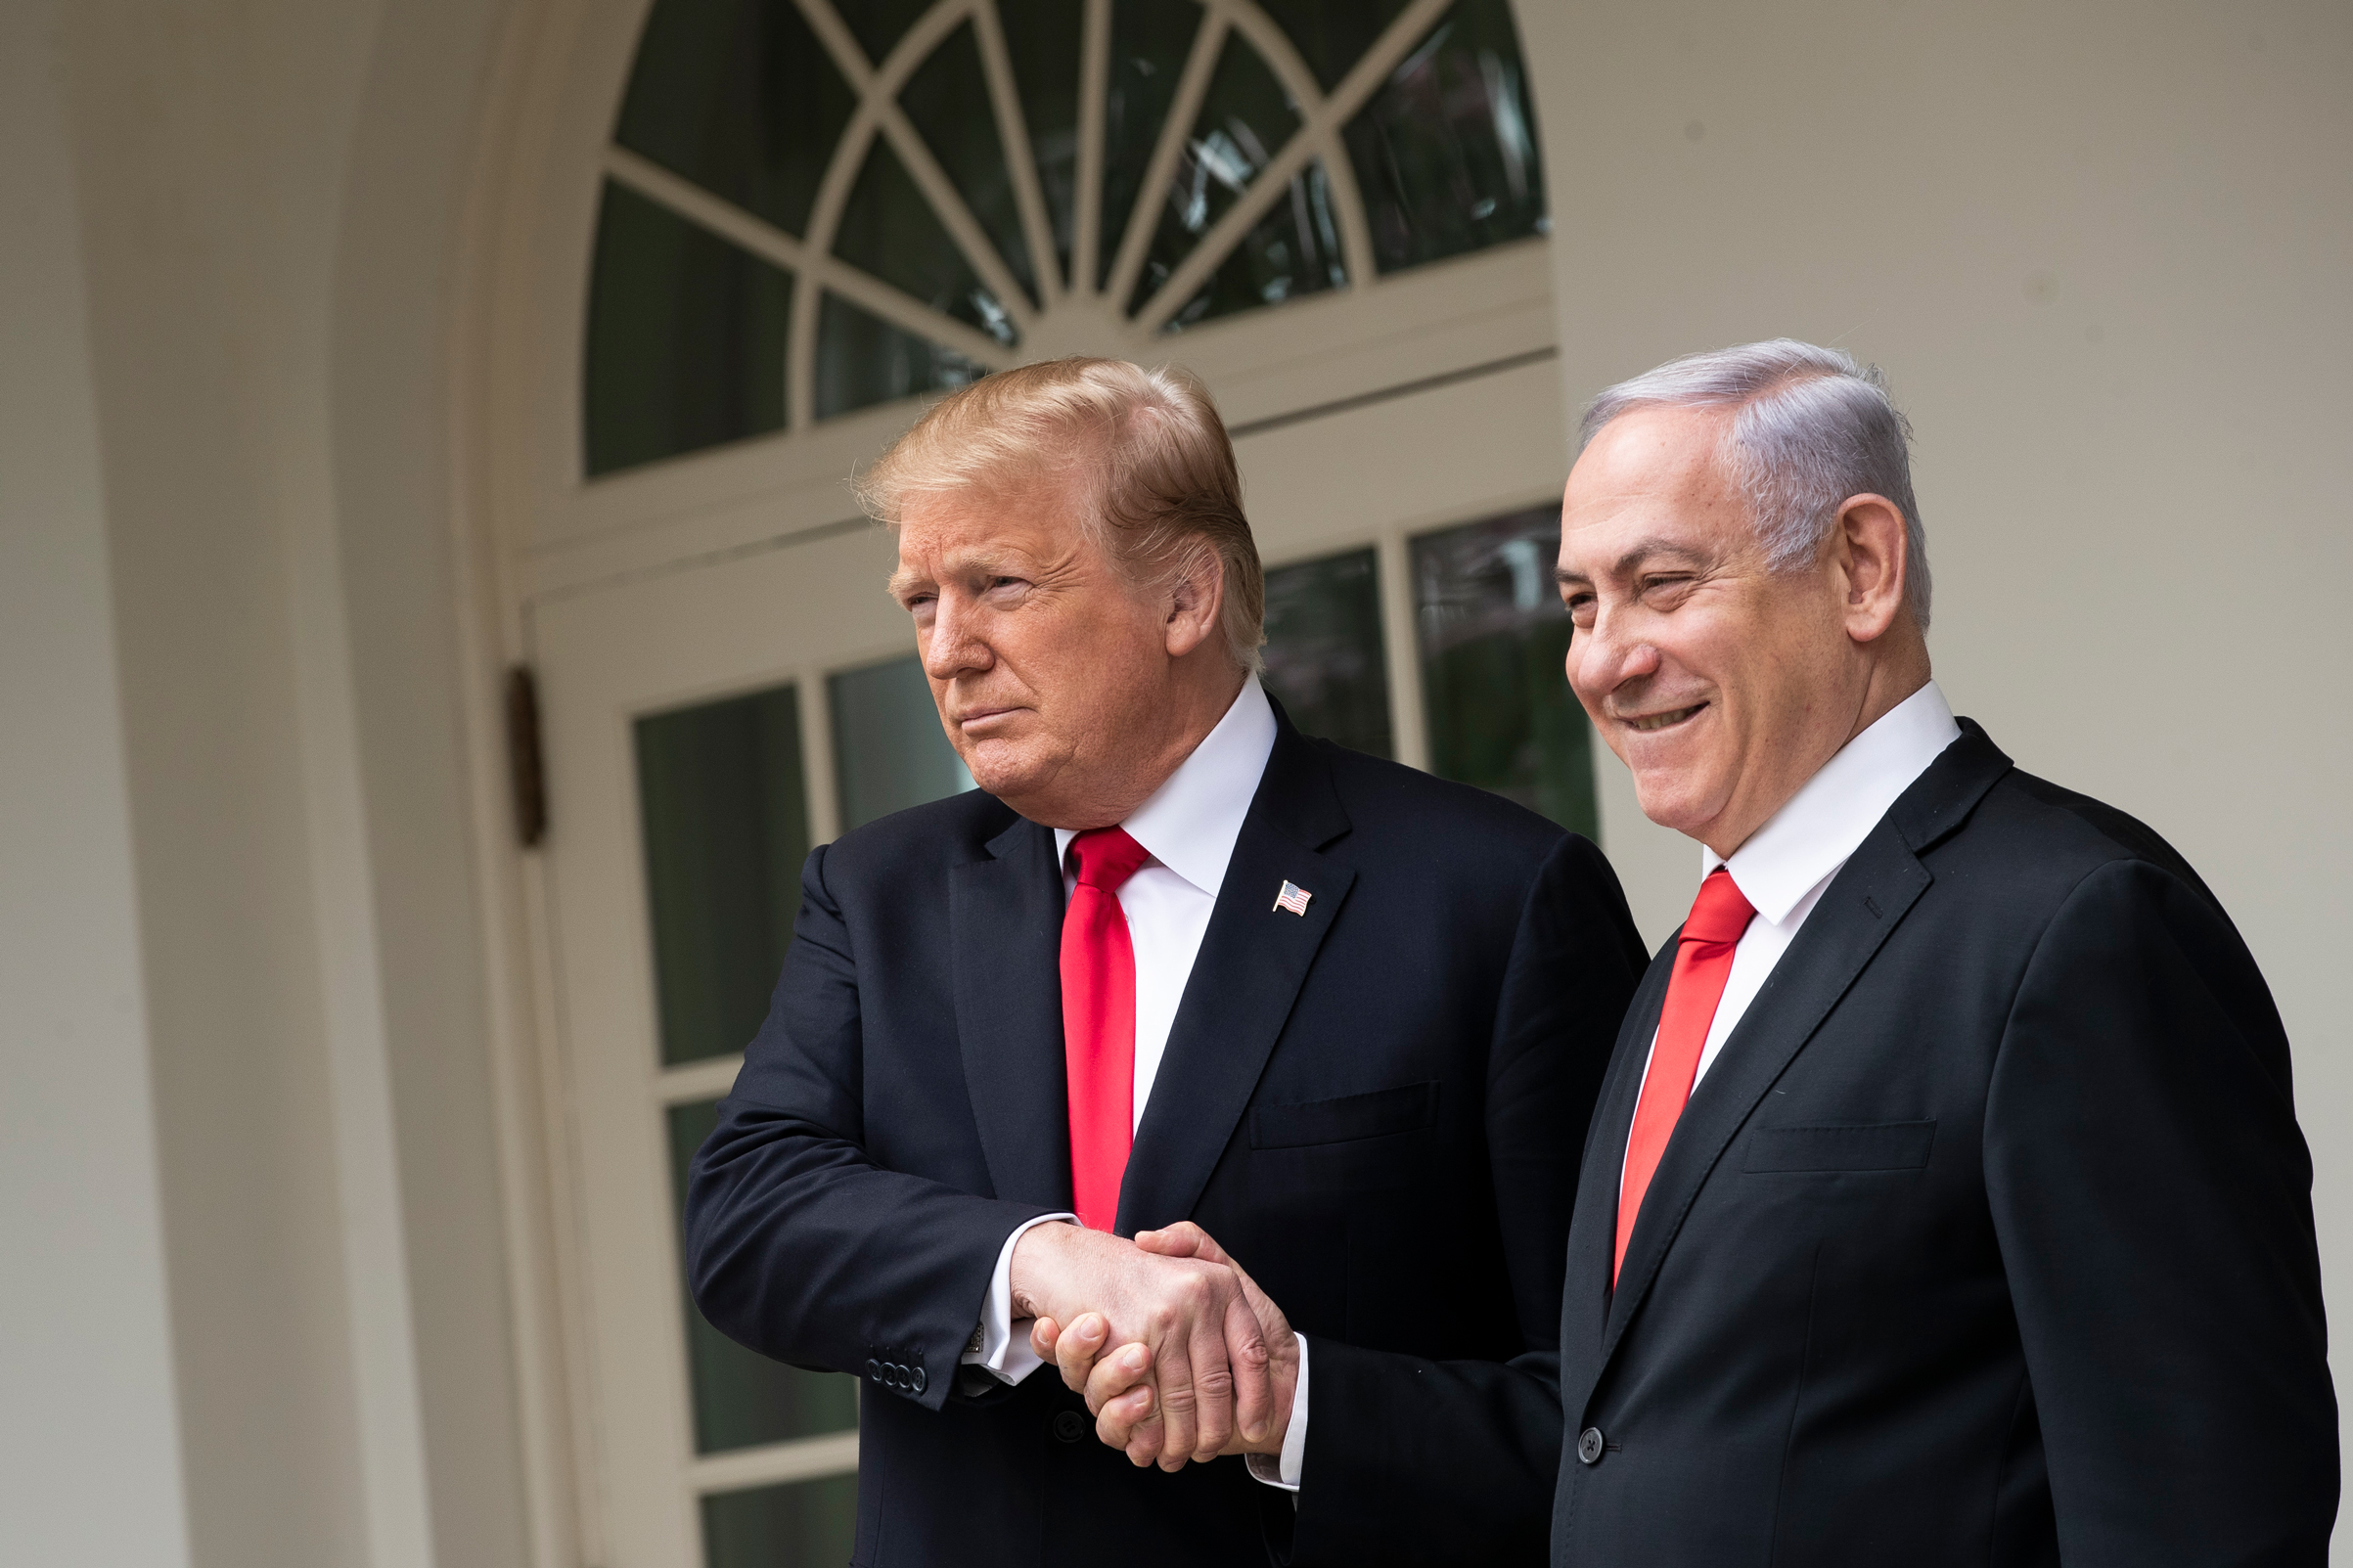 President Donald Trump and Prime Minister of Israel Benjamin Netanyahu shake hands while walking through the colonnade prior to an Oval Office meeting at the White House March 25, 2019 in Washington, D.C. (Drew Angerer/Getty Images)